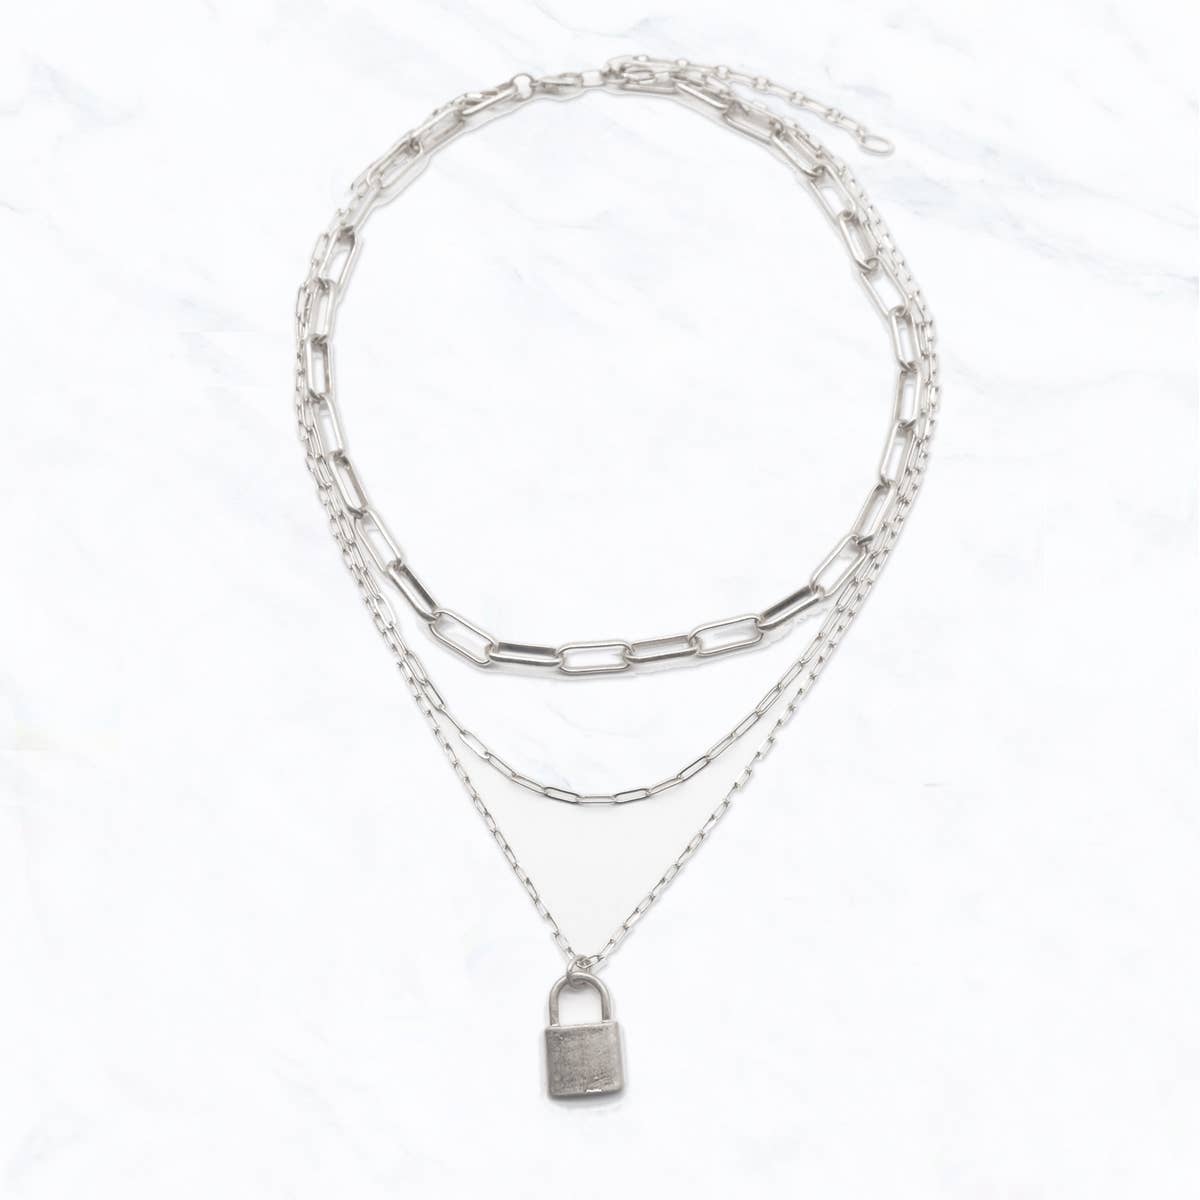 Multi Layered Metal With a Lock Necklace